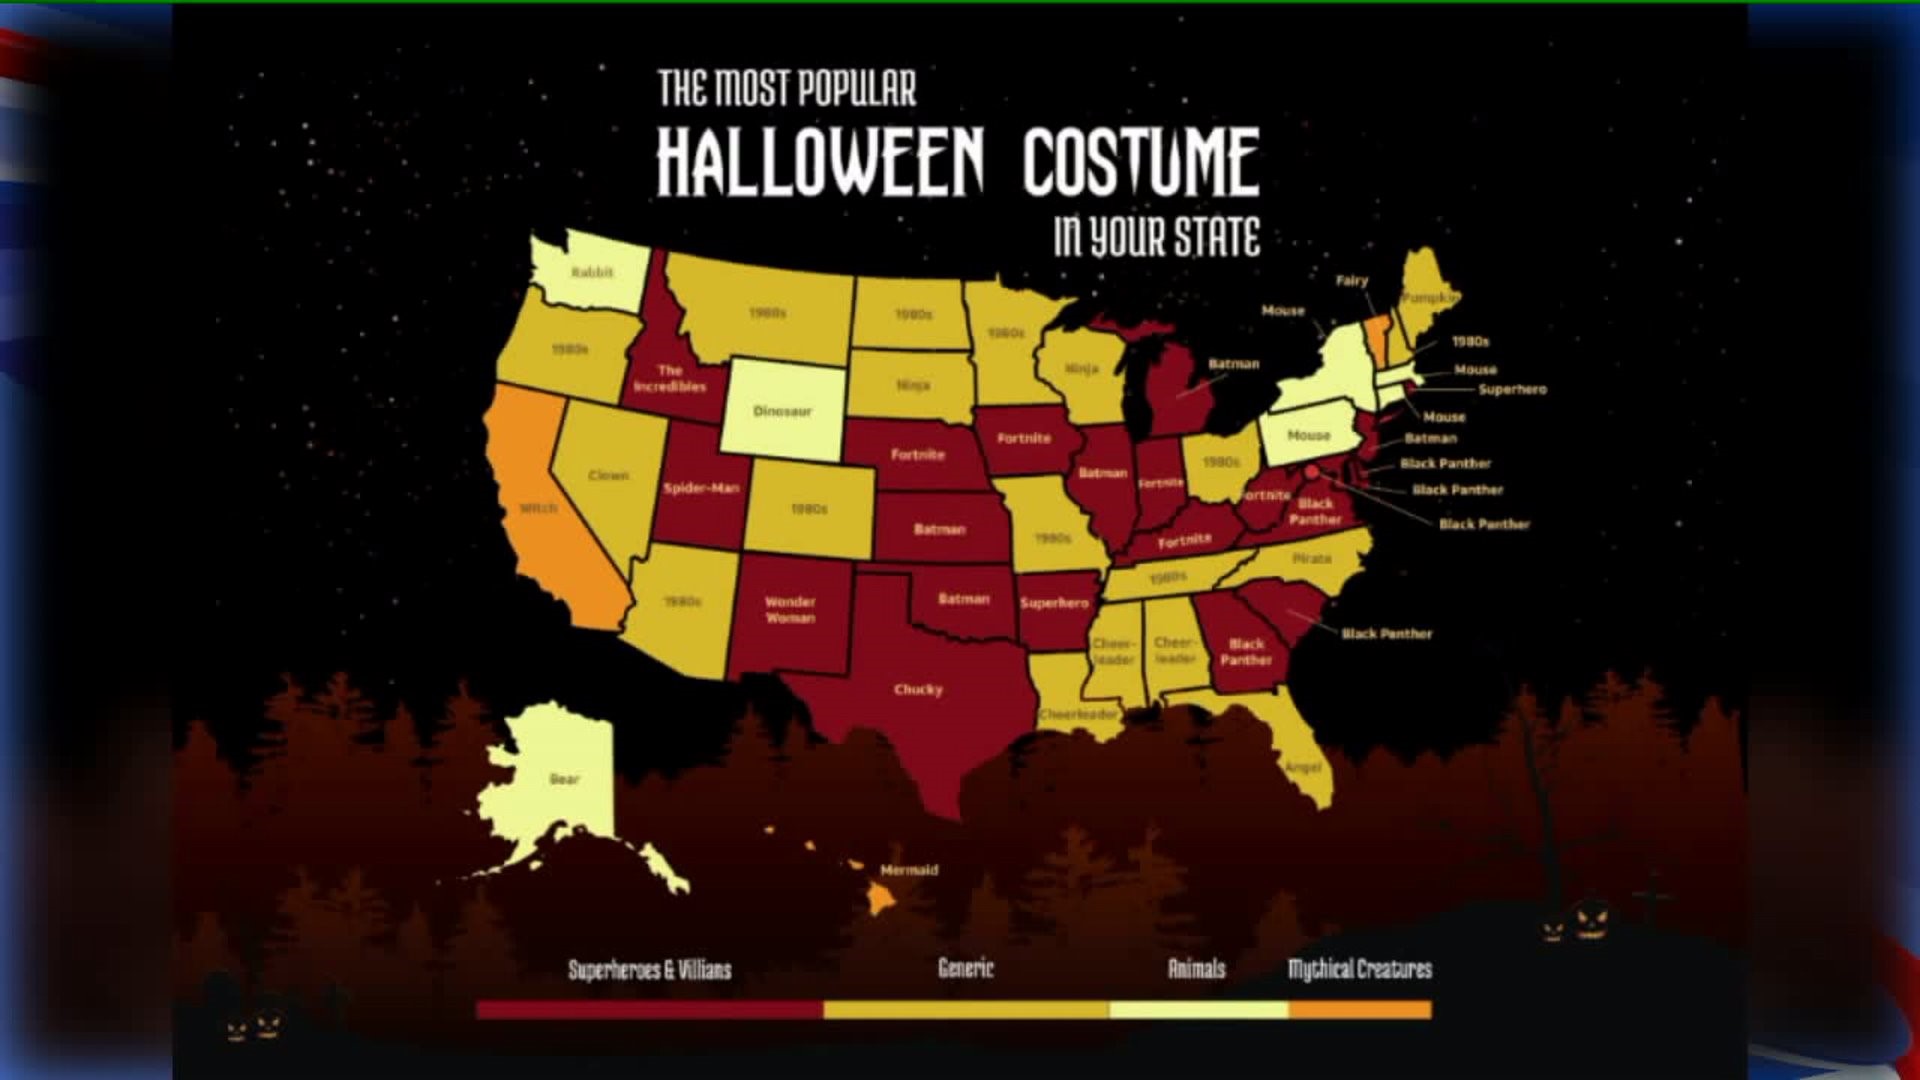 Most Popular Movies, Costumes, and Candy By State